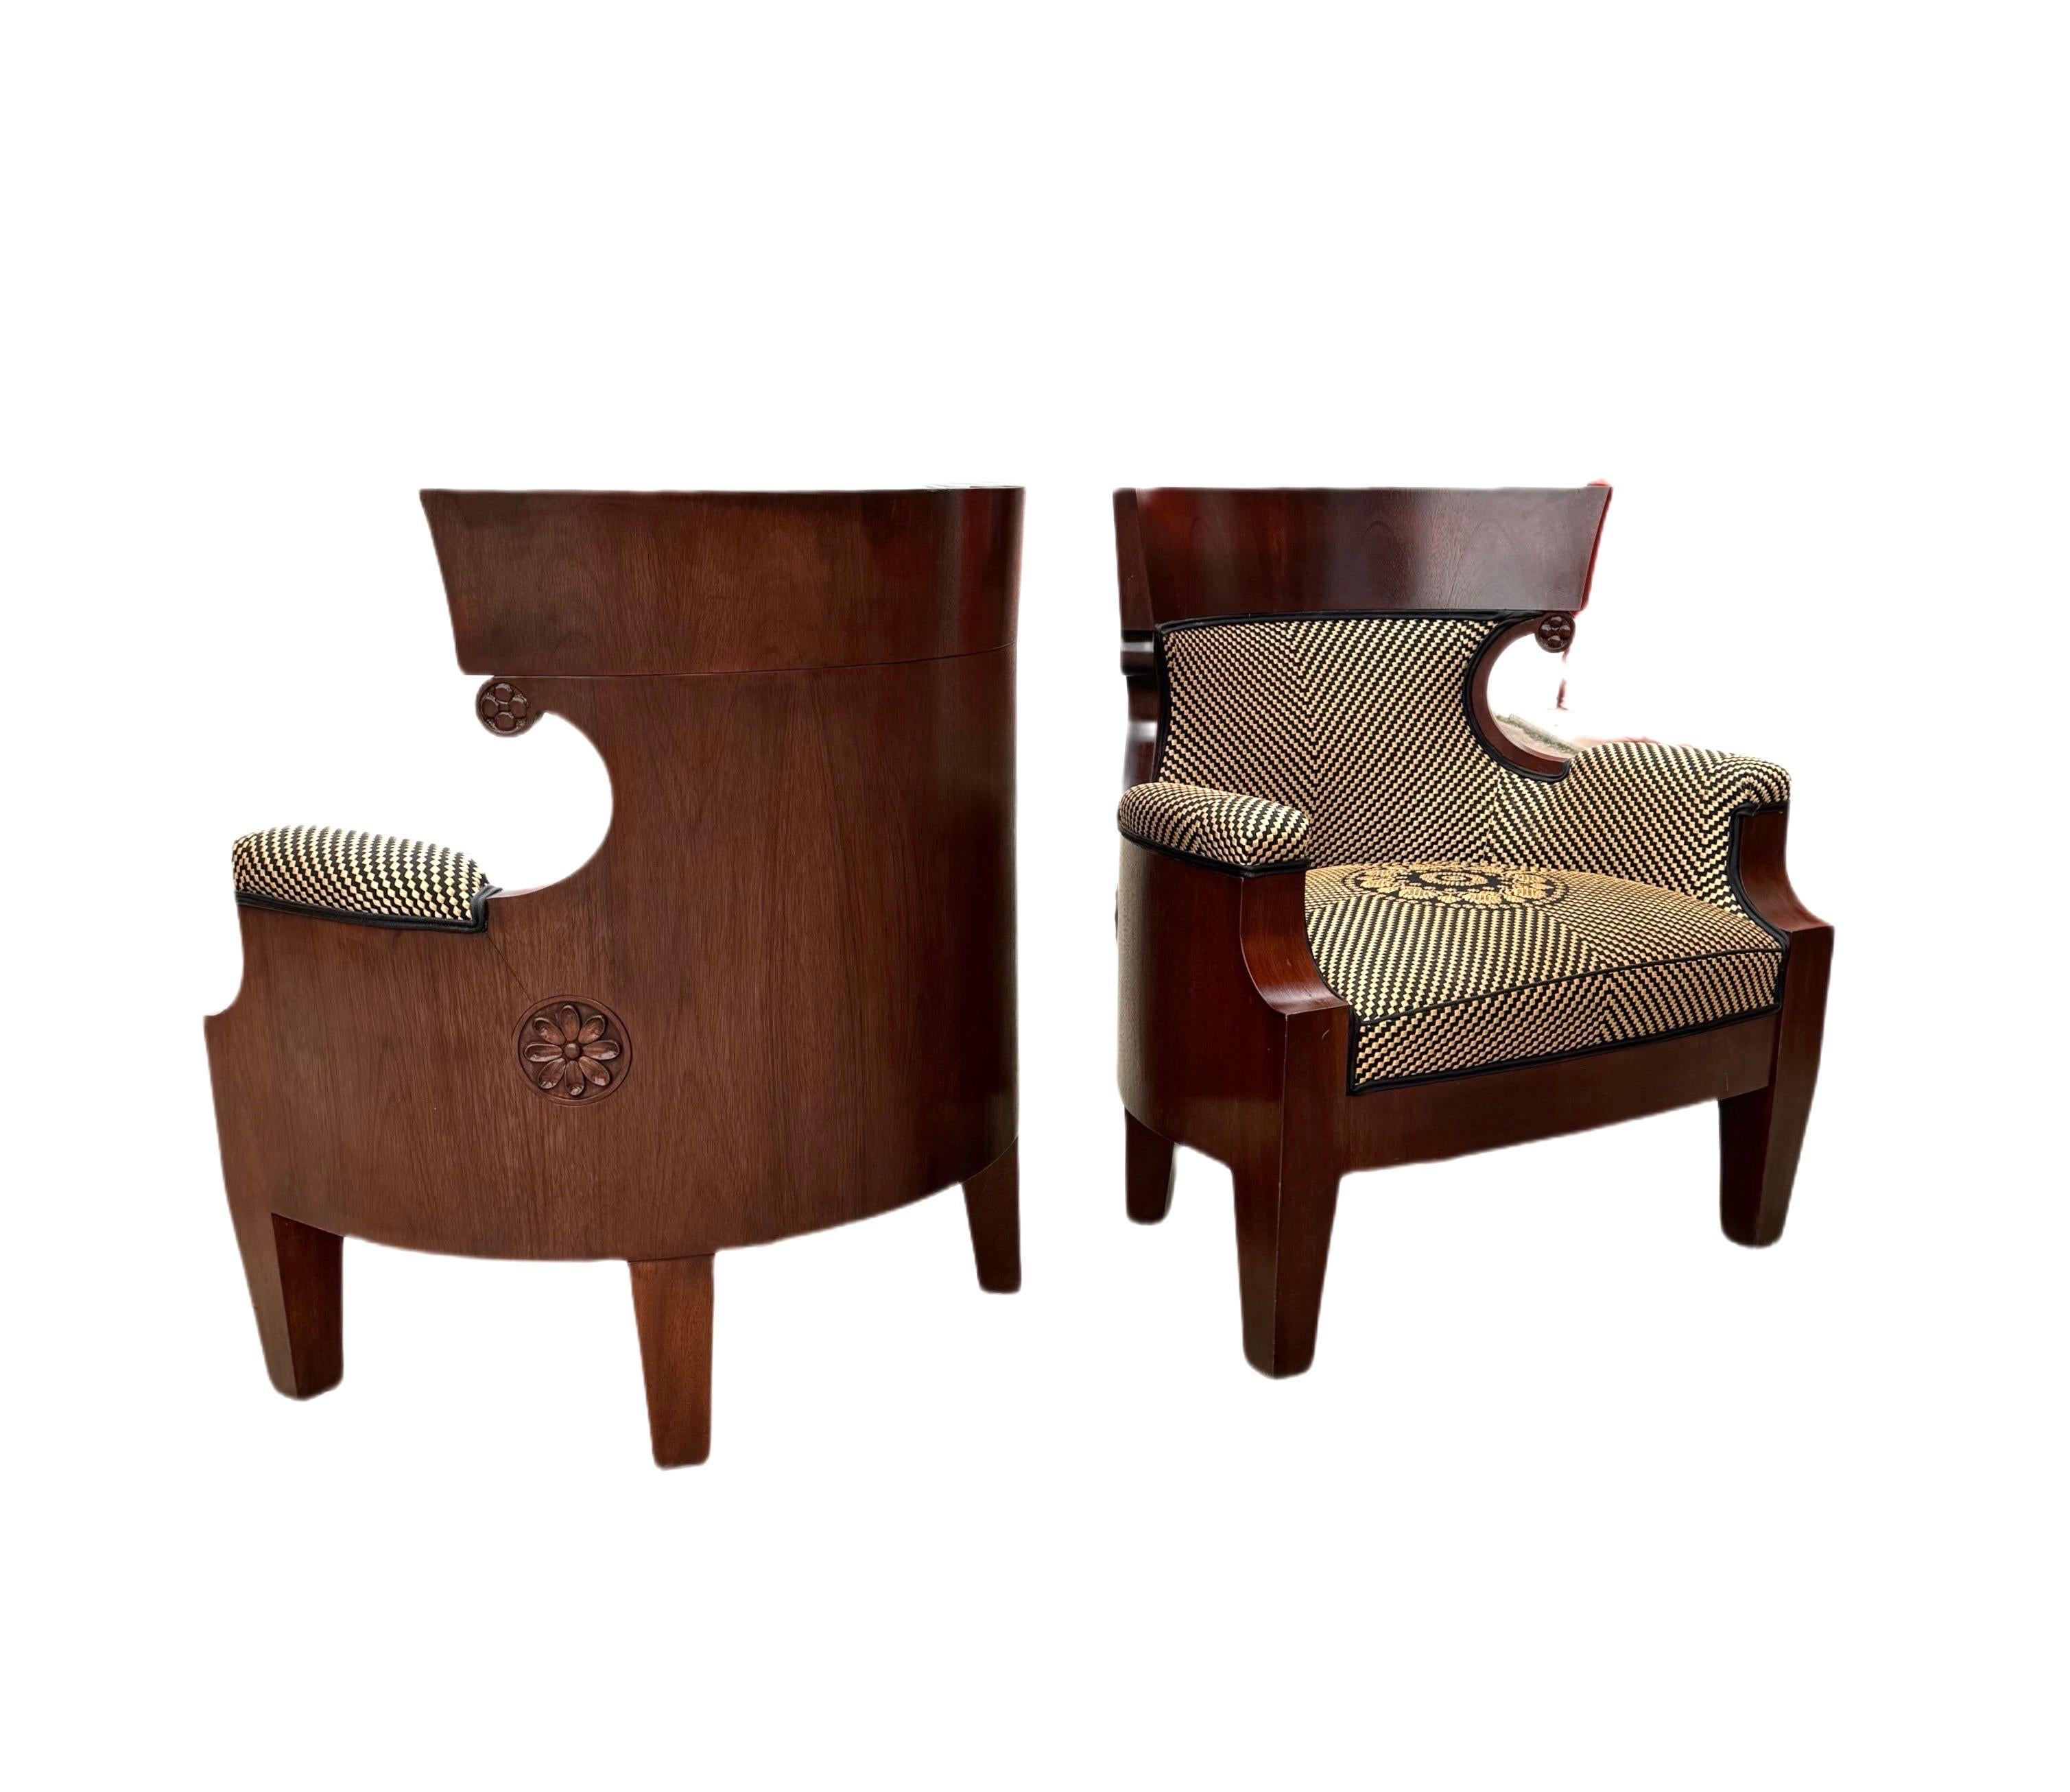 Elevate your interior with this stunning pair of Biedermeier-style bergères, a blend of vintage charm and timeless elegance. These chairs feature exquisite walnut veneers paired with luxurious gold and black raffia upholstery, creating an air of